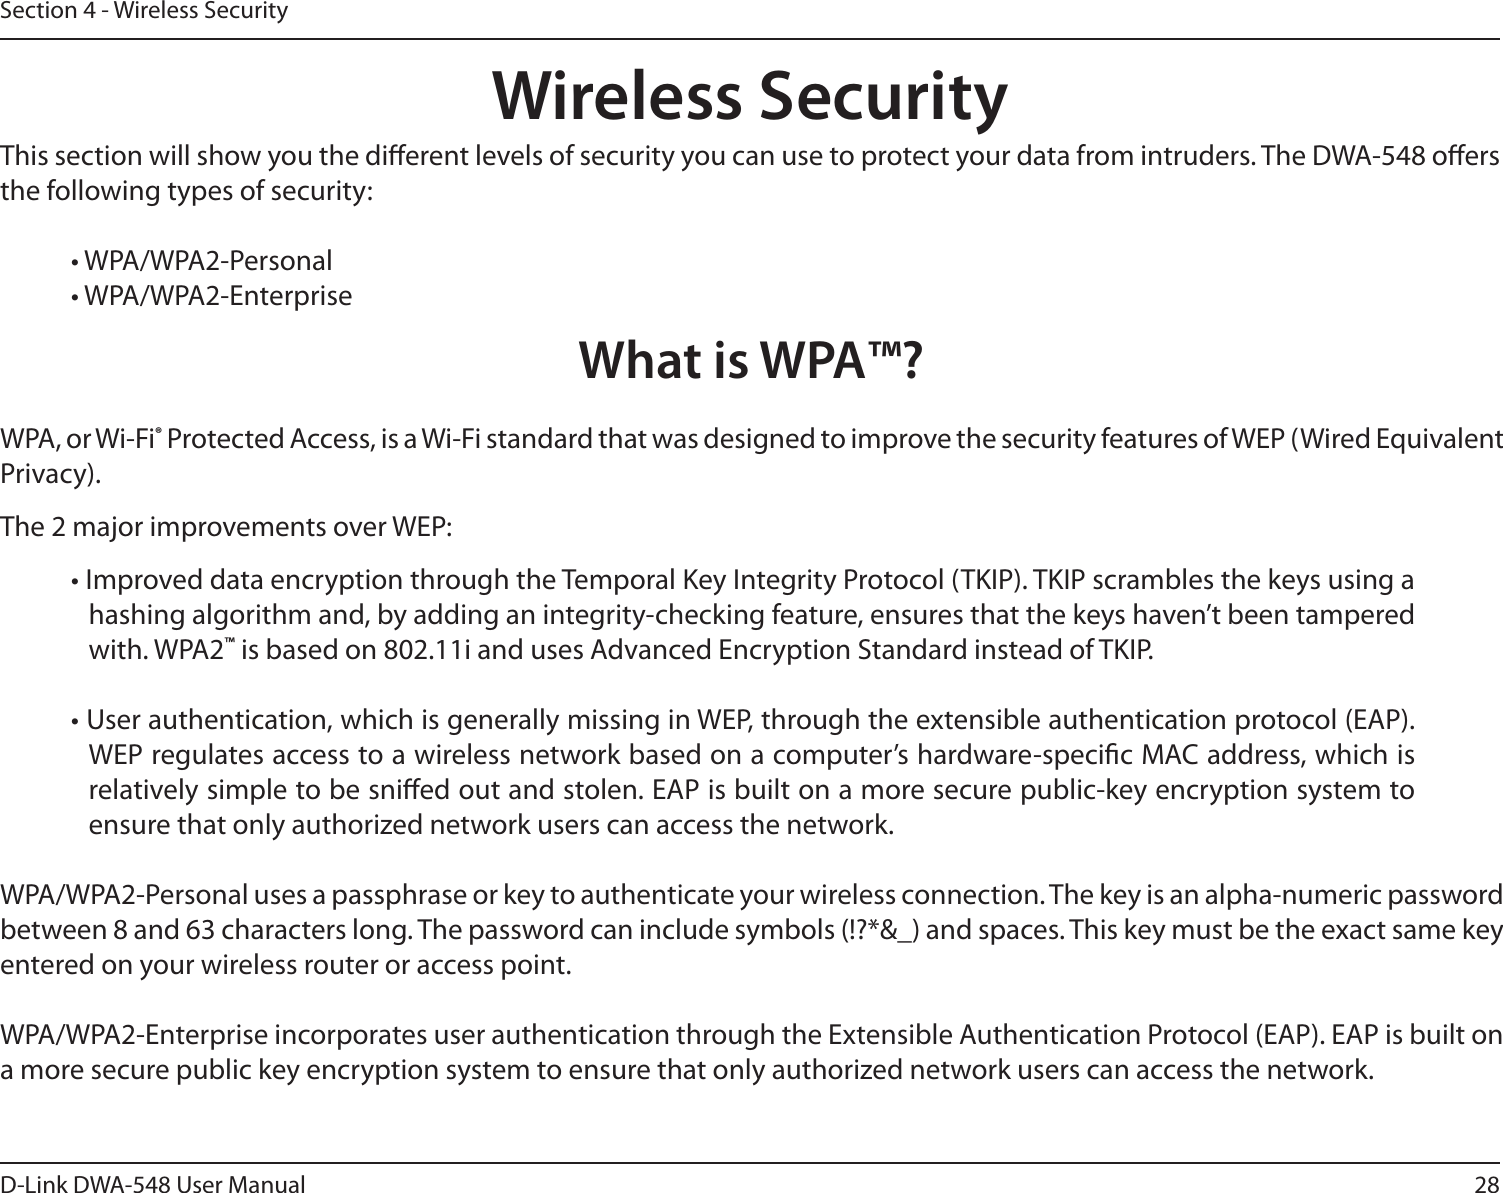 28D-Link DWA-548 User ManualSection 4 - Wireless SecurityWireless SecurityThis section will show you the dierent levels of security you can use to protect your data from intruders. The DWA-548 oers the following types of security:• WPA/WPA2-Personal     • WPA/WPA2-EnterpriseWhat is WPA™?WPA, or Wi-Fi® Protected Access, is a Wi-Fi standard that was designed to improve the security features of WEP (Wired Equivalent Privacy).  The 2 major improvements over WEP: • Improved data encryption through the Temporal Key Integrity Protocol (TKIP). TKIP scrambles the keys using a hashing algorithm and, by adding an integrity-checking feature, ensures that the keys haven’t been tampered with. WPA2™ is based on 802.11i and uses Advanced Encryption Standard instead of TKIP.• User authentication, which is generally missing in WEP, through the extensible authentication protocol (EAP). WEP regulates access to a wireless network based on a computer’s hardware-specic MAC address, which is relatively simple to be snied out and stolen. EAP is built on a more secure public-key encryption system to ensure that only authorized network users can access the network.WPA/WPA2-Personal uses a passphrase or key to authenticate your wireless connection. The key is an alpha-numeric password between 8 and 63 characters long. The password can include symbols (!?*&amp;_) and spaces. This key must be the exact same key entered on your wireless router or access point.WPA/WPA2-Enterprise incorporates user authentication through the Extensible Authentication Protocol (EAP). EAP is built on a more secure public key encryption system to ensure that only authorized network users can access the network.